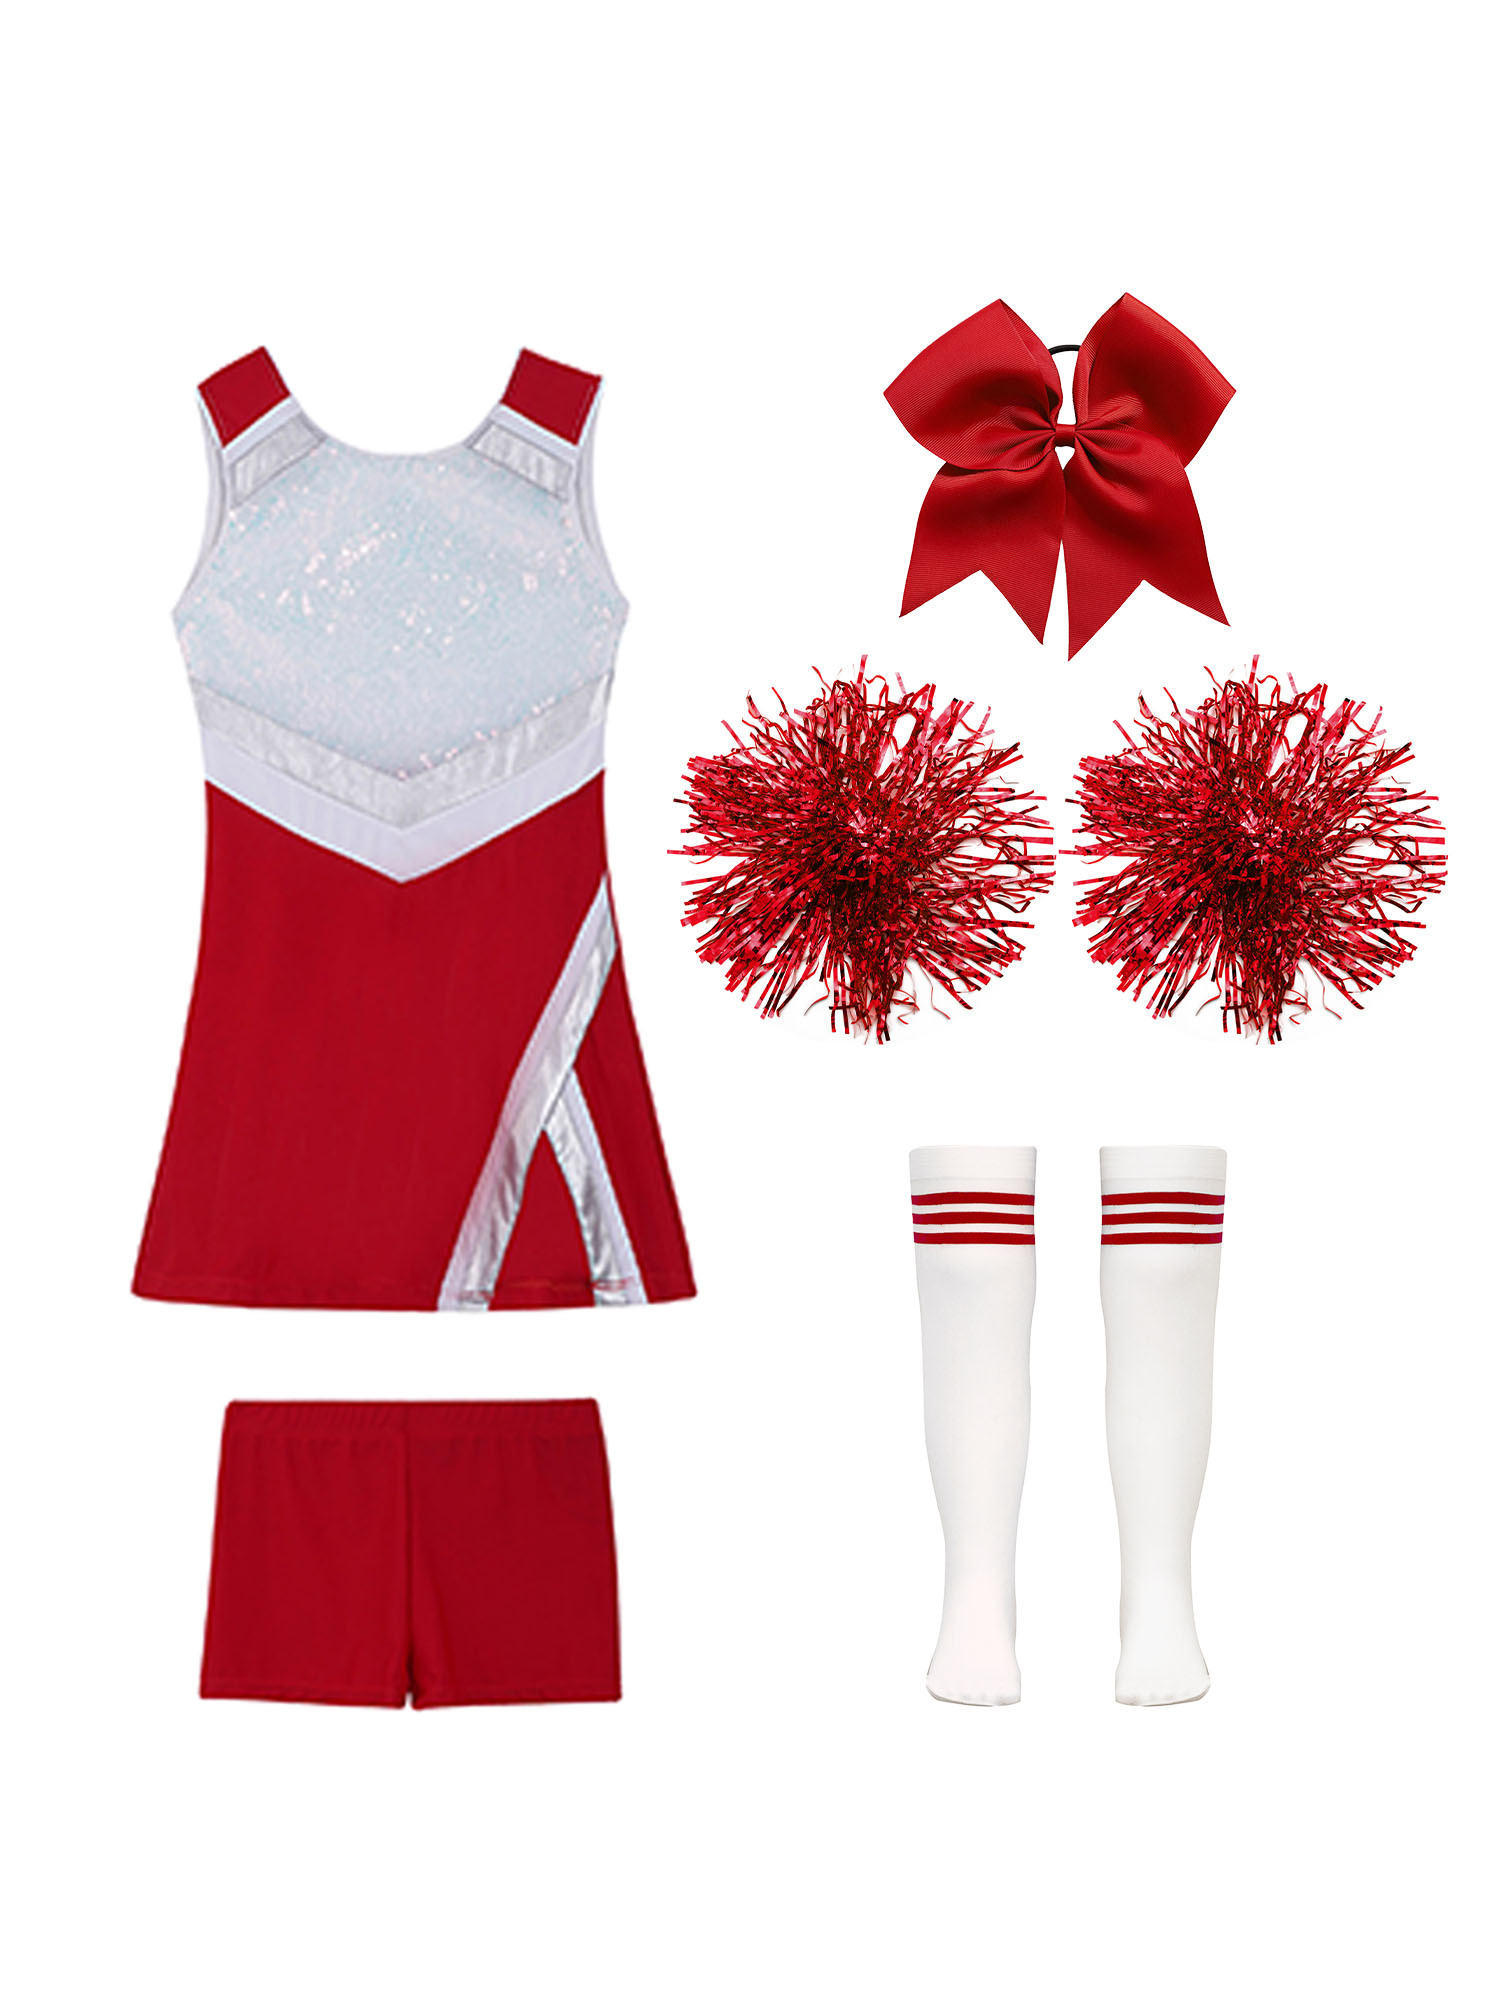 TiaoBug Kids Girls Cheer Leader Uniform Sports Games Cheerleading Dance Outfits Halloween Carnival Fancy Dress Up B Red 8 - image 3 of 5